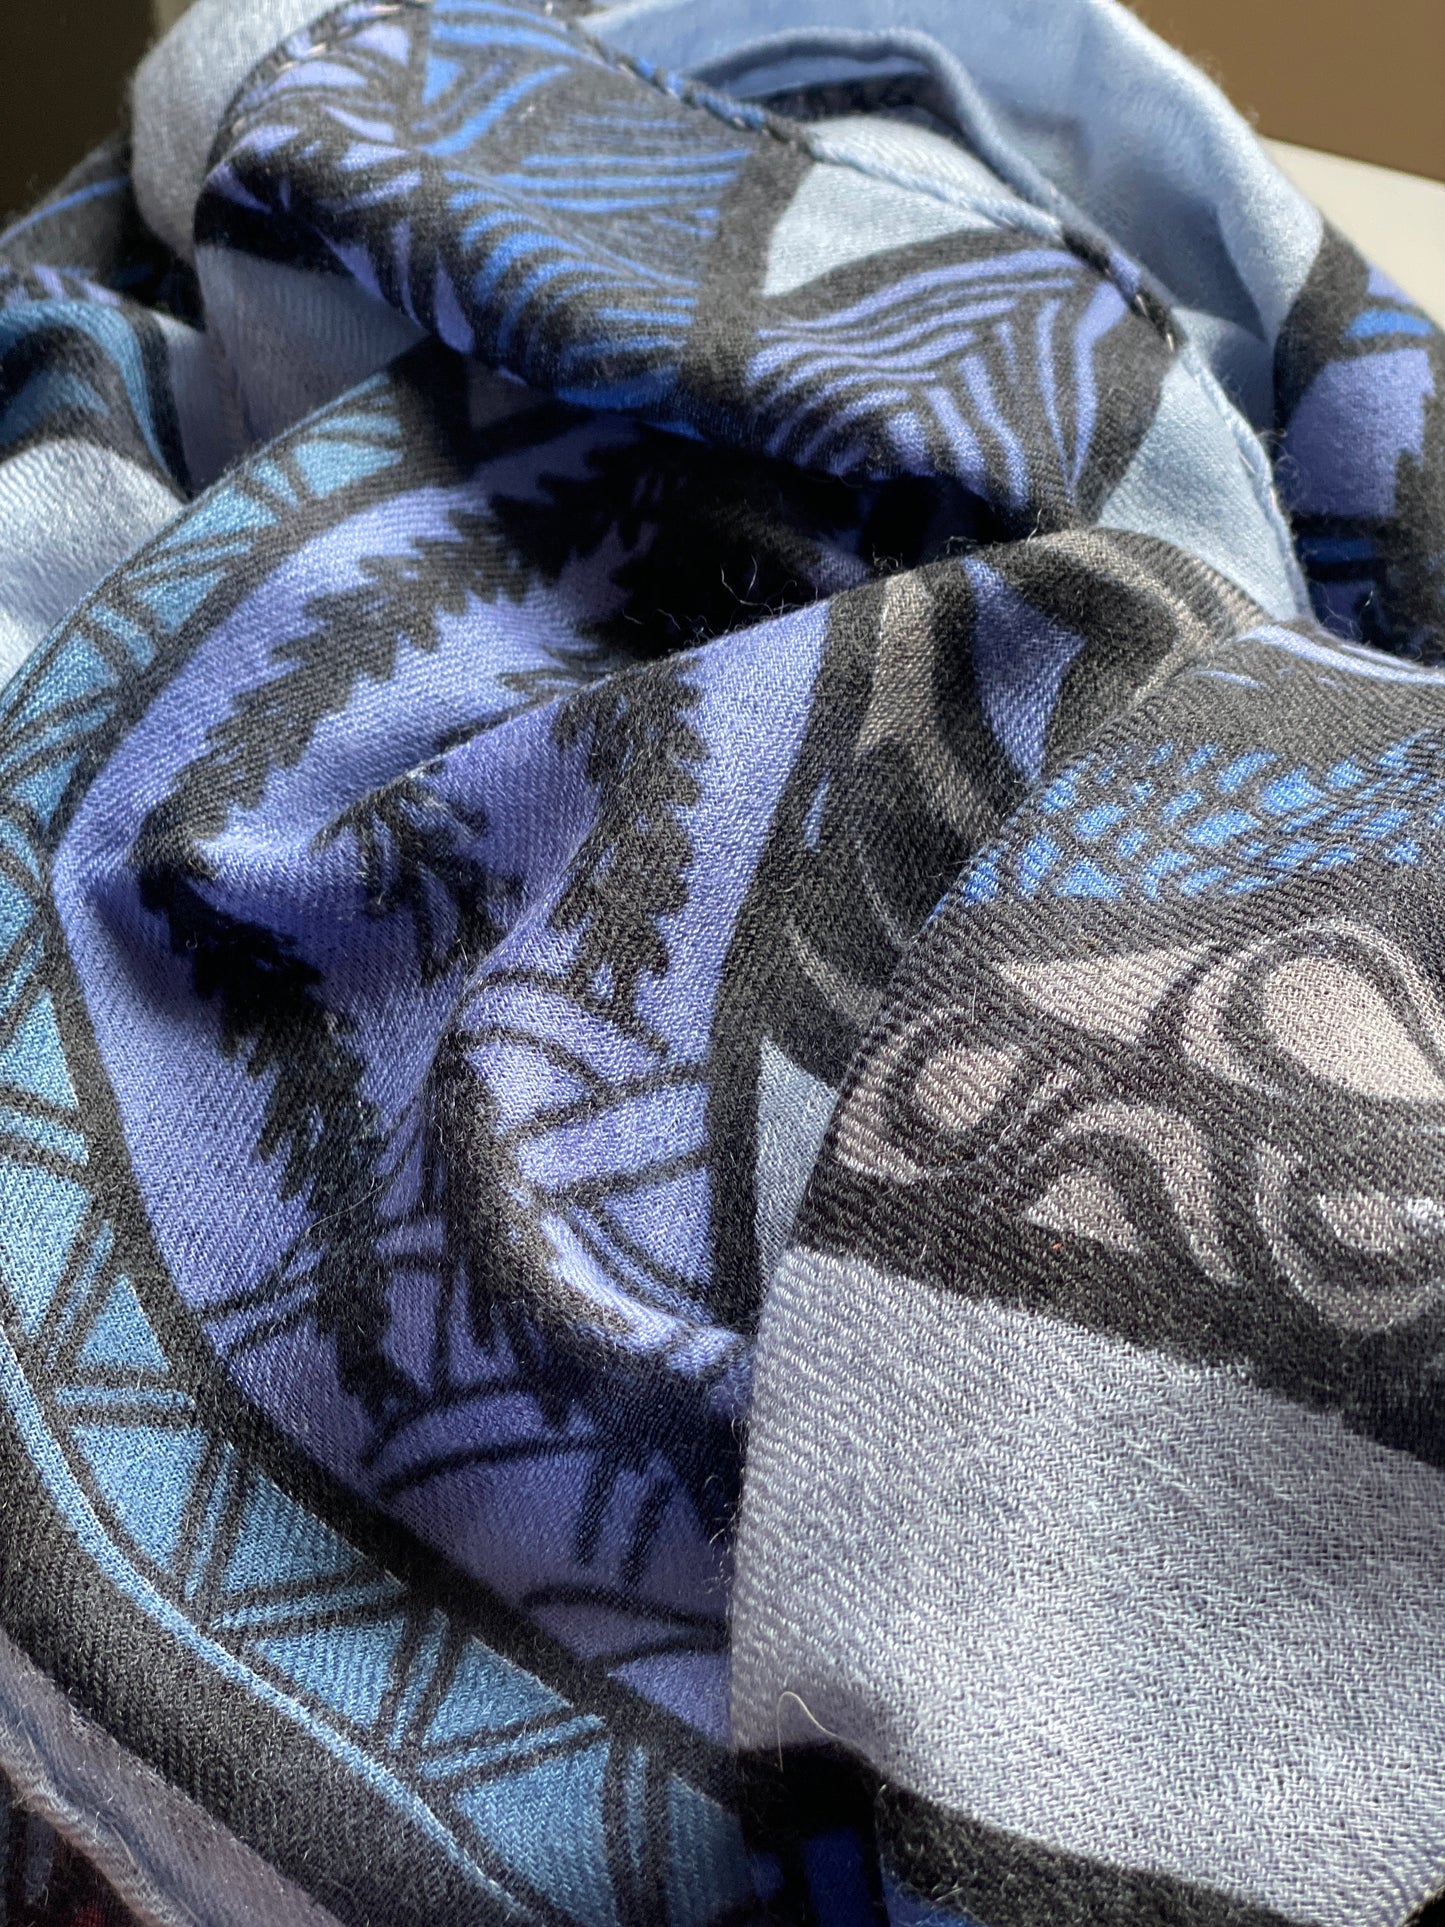 "SOUL LEAVES" Light summer scarf made of 100% light baby cashmere. Limited to 5 pieces